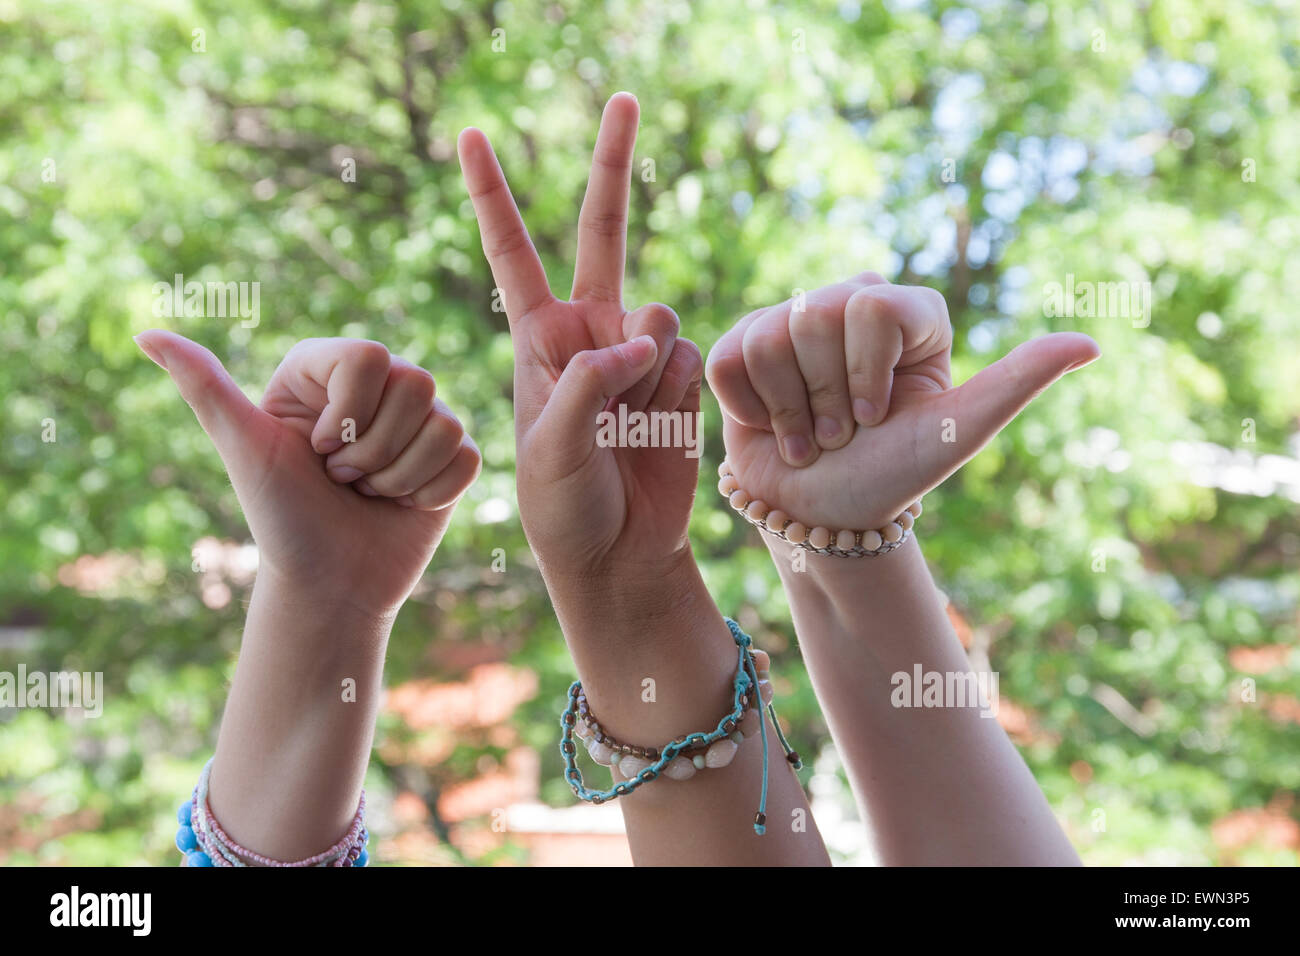 Hand signs by three young girls. The unity of friendship is shown here by individuality. They have different ways to express in unity. Stock Photo